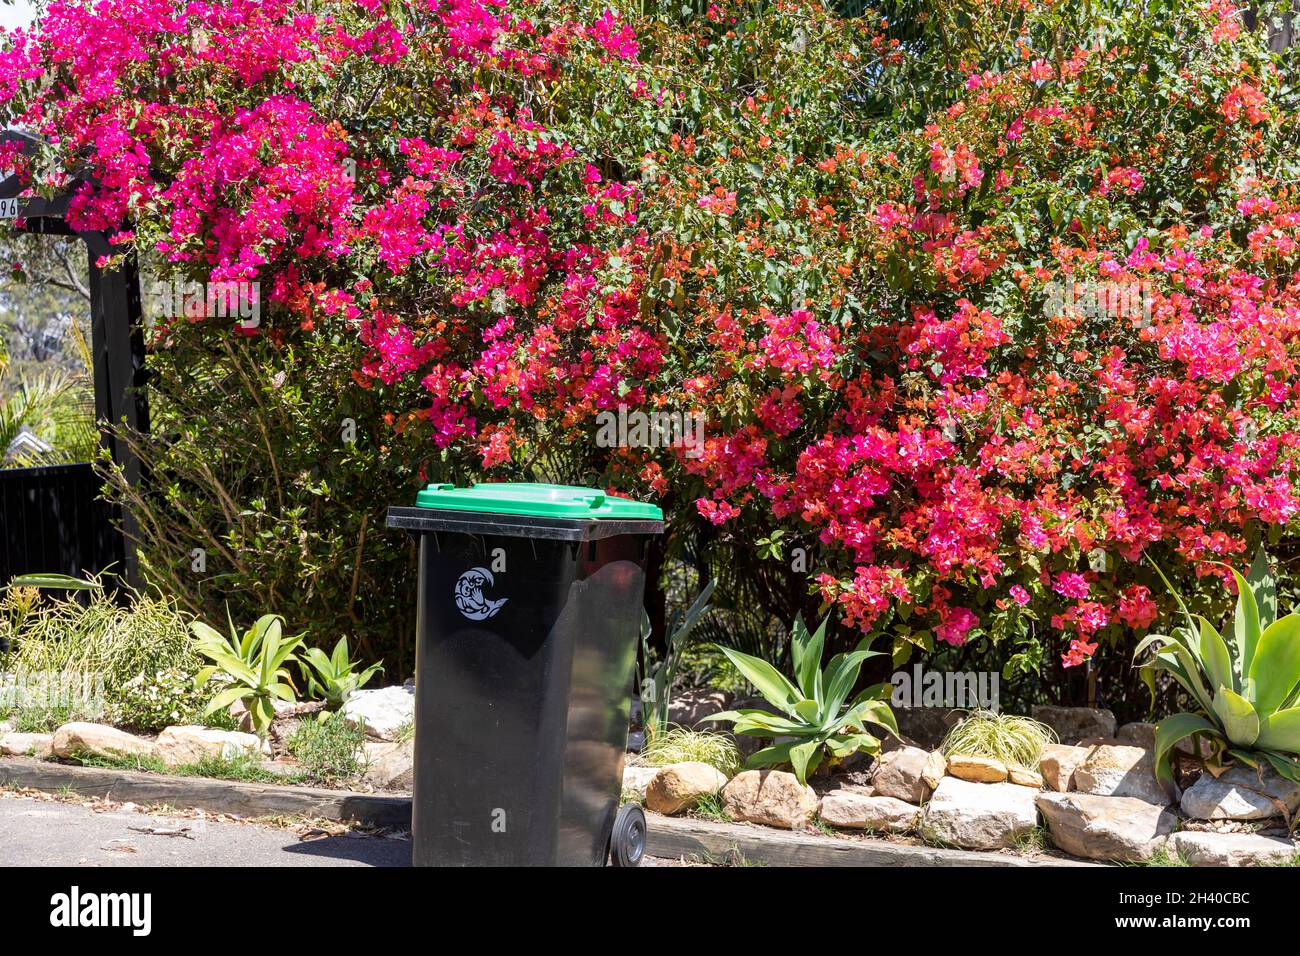 Green vegetation wheely bin containing garden waste out for council collection and composting,Sydney,Australia Stock Photo